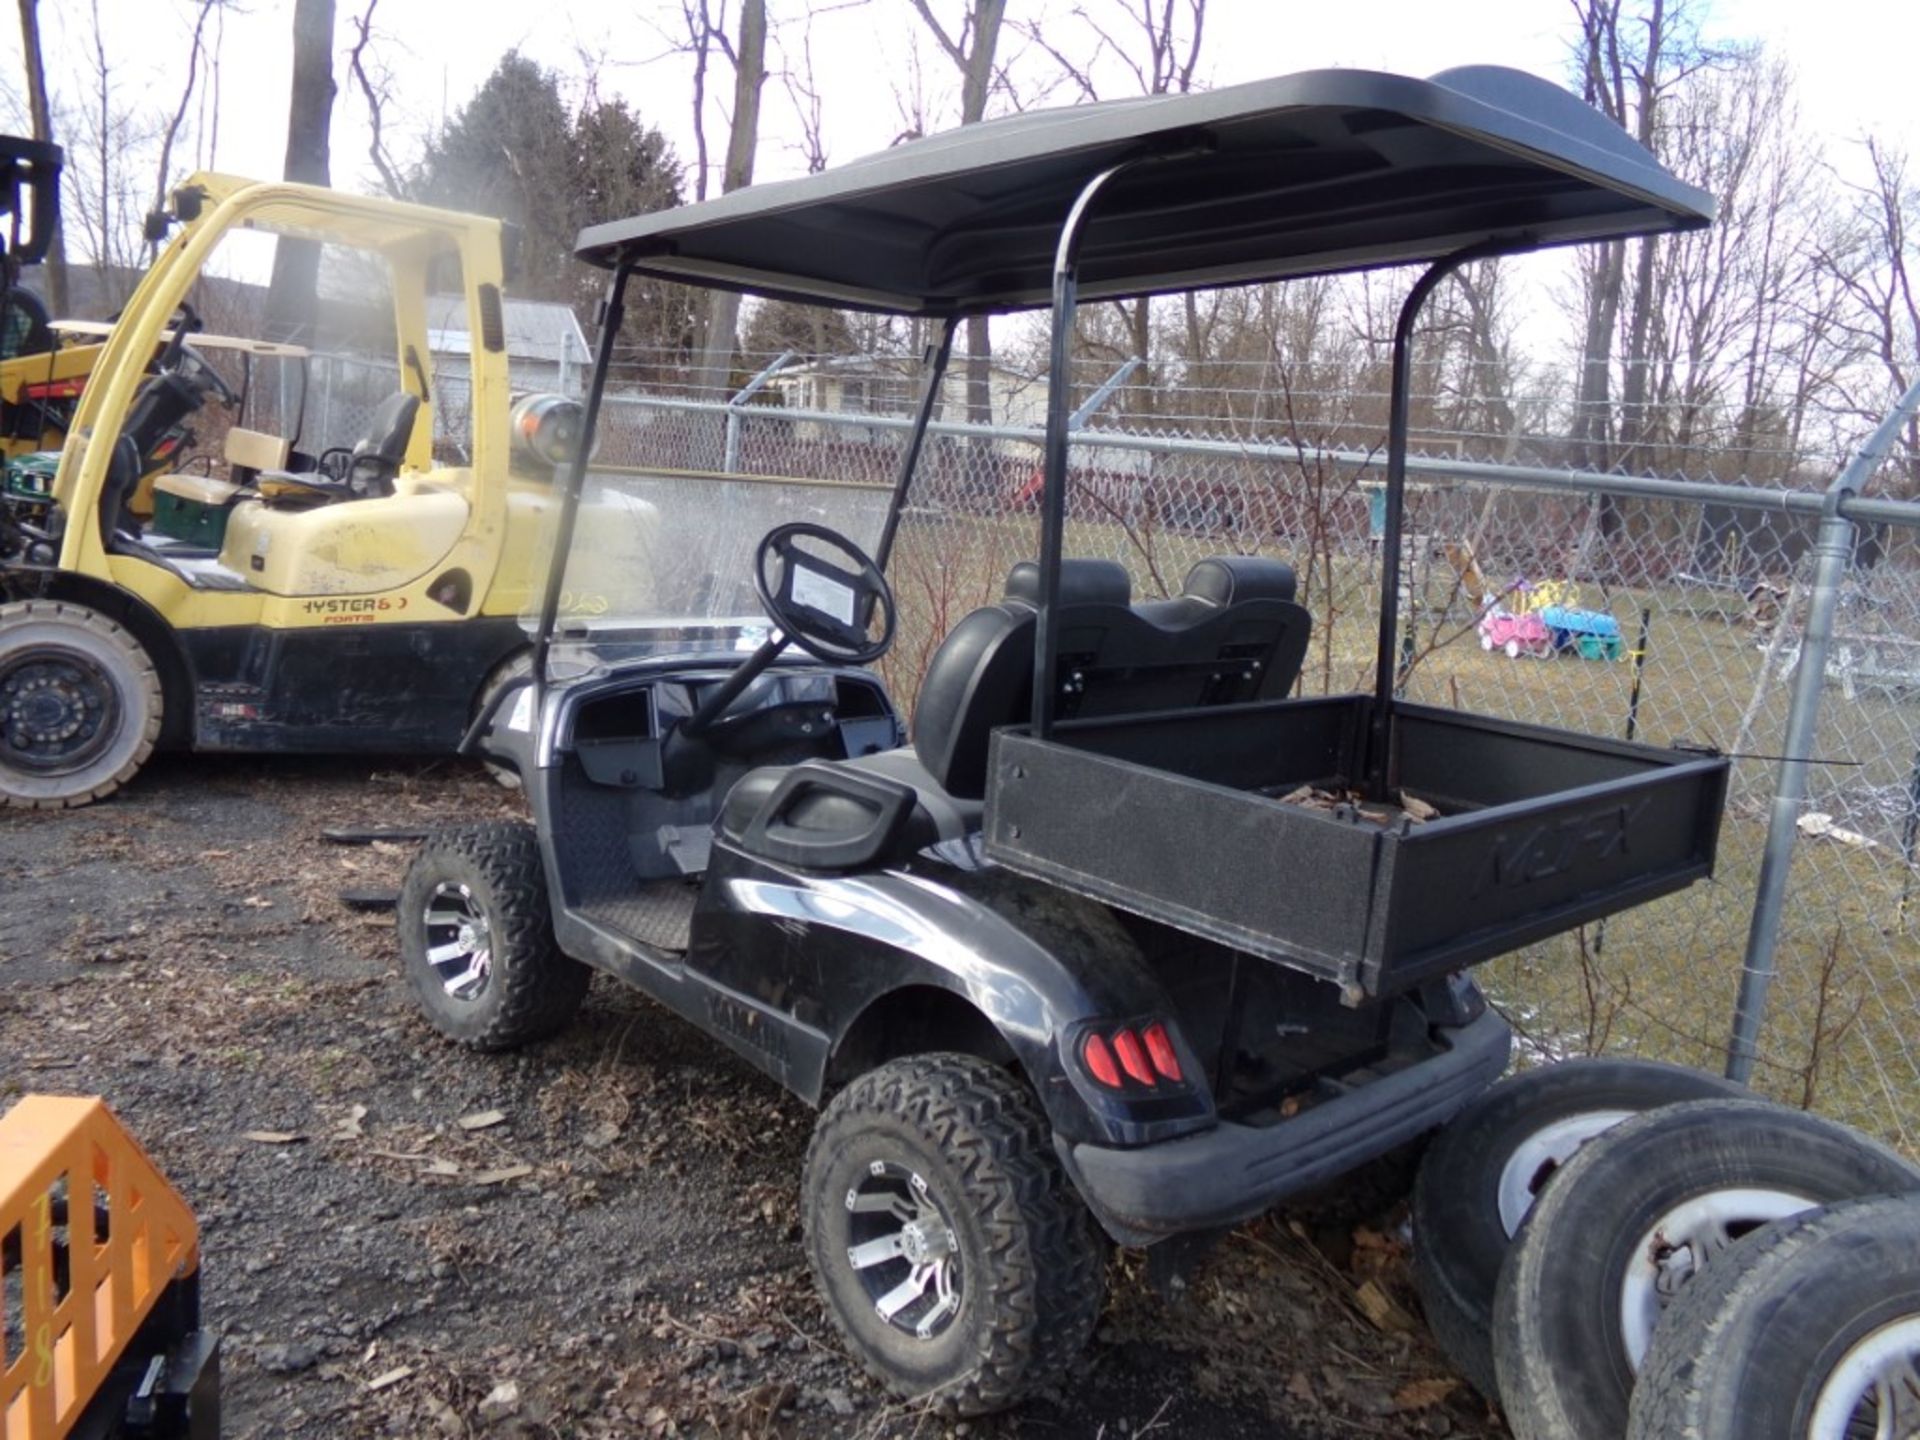 Black,Yamaha, Gas Powered, Golf Cart,Canopy And Windshield, Steel Utility Box, Liifted Suspension, - Image 2 of 2